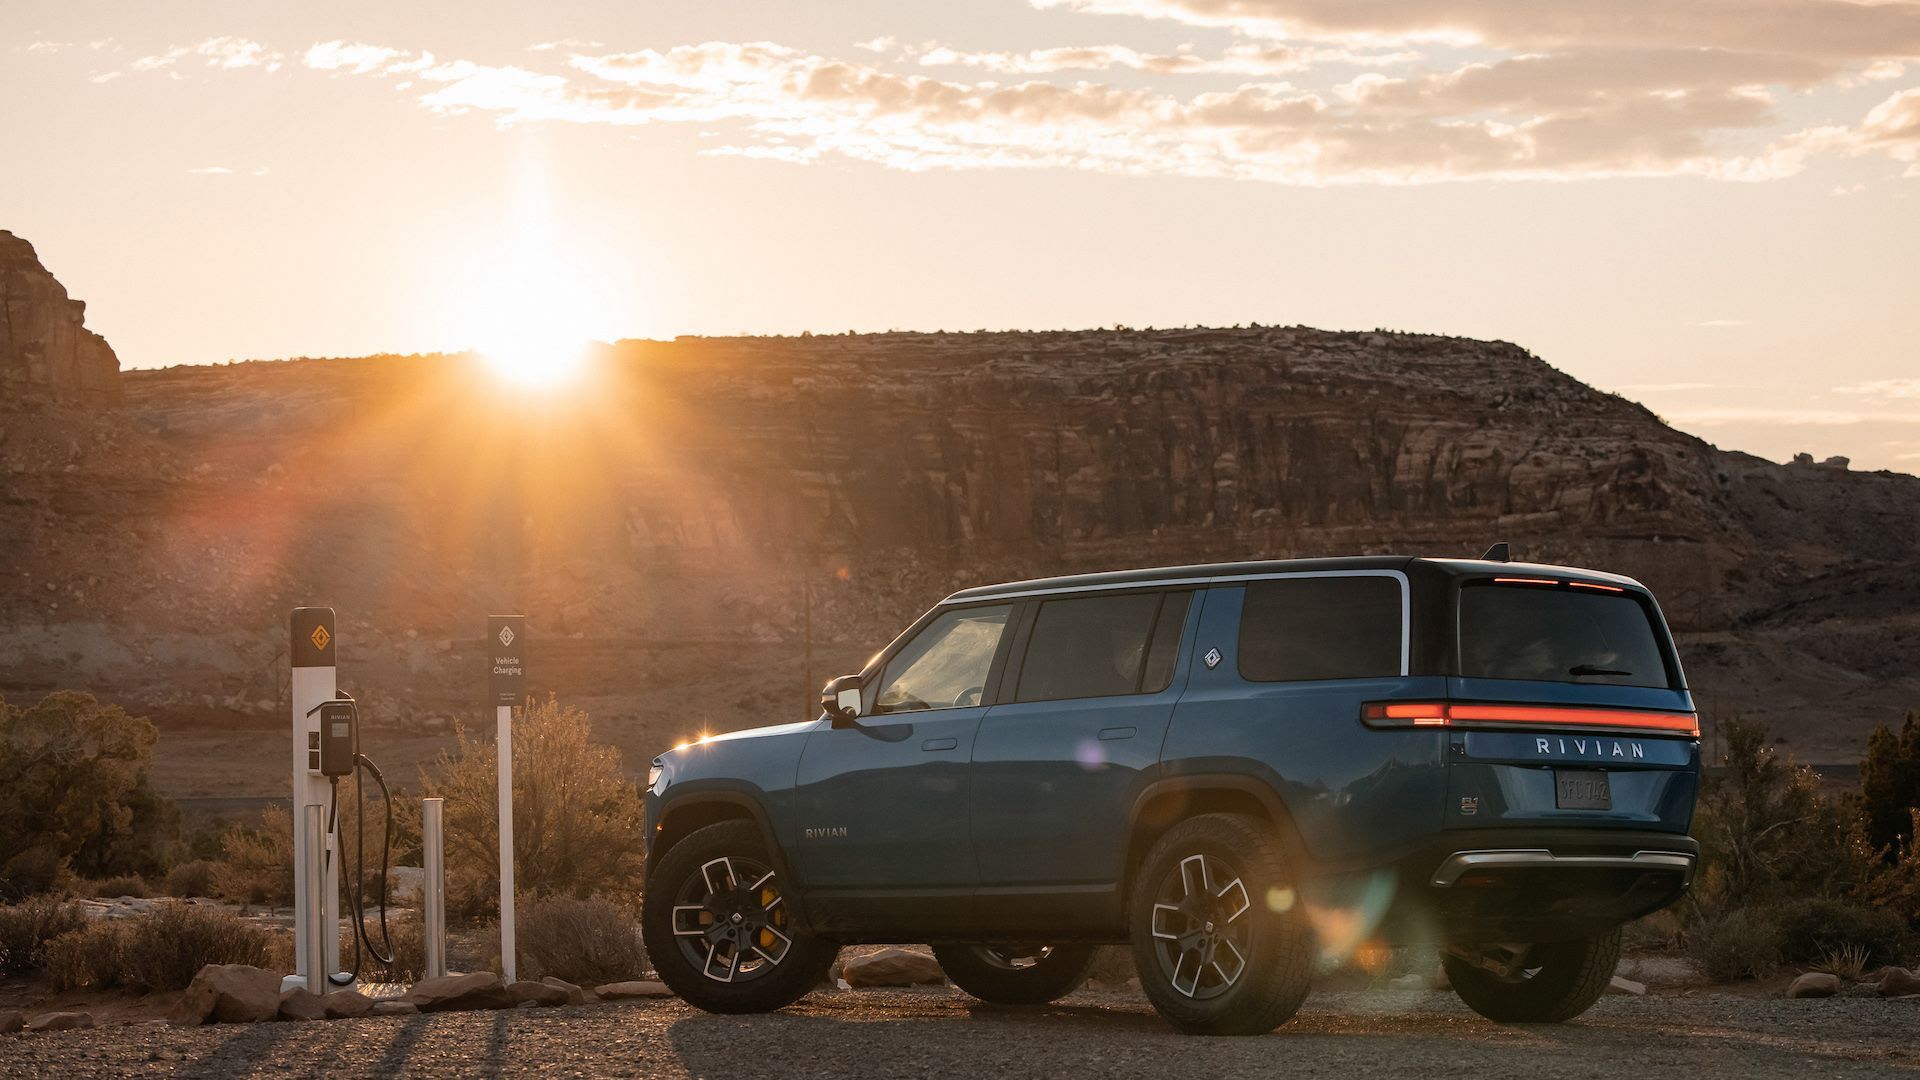 Photo of Rivian's electric SUV